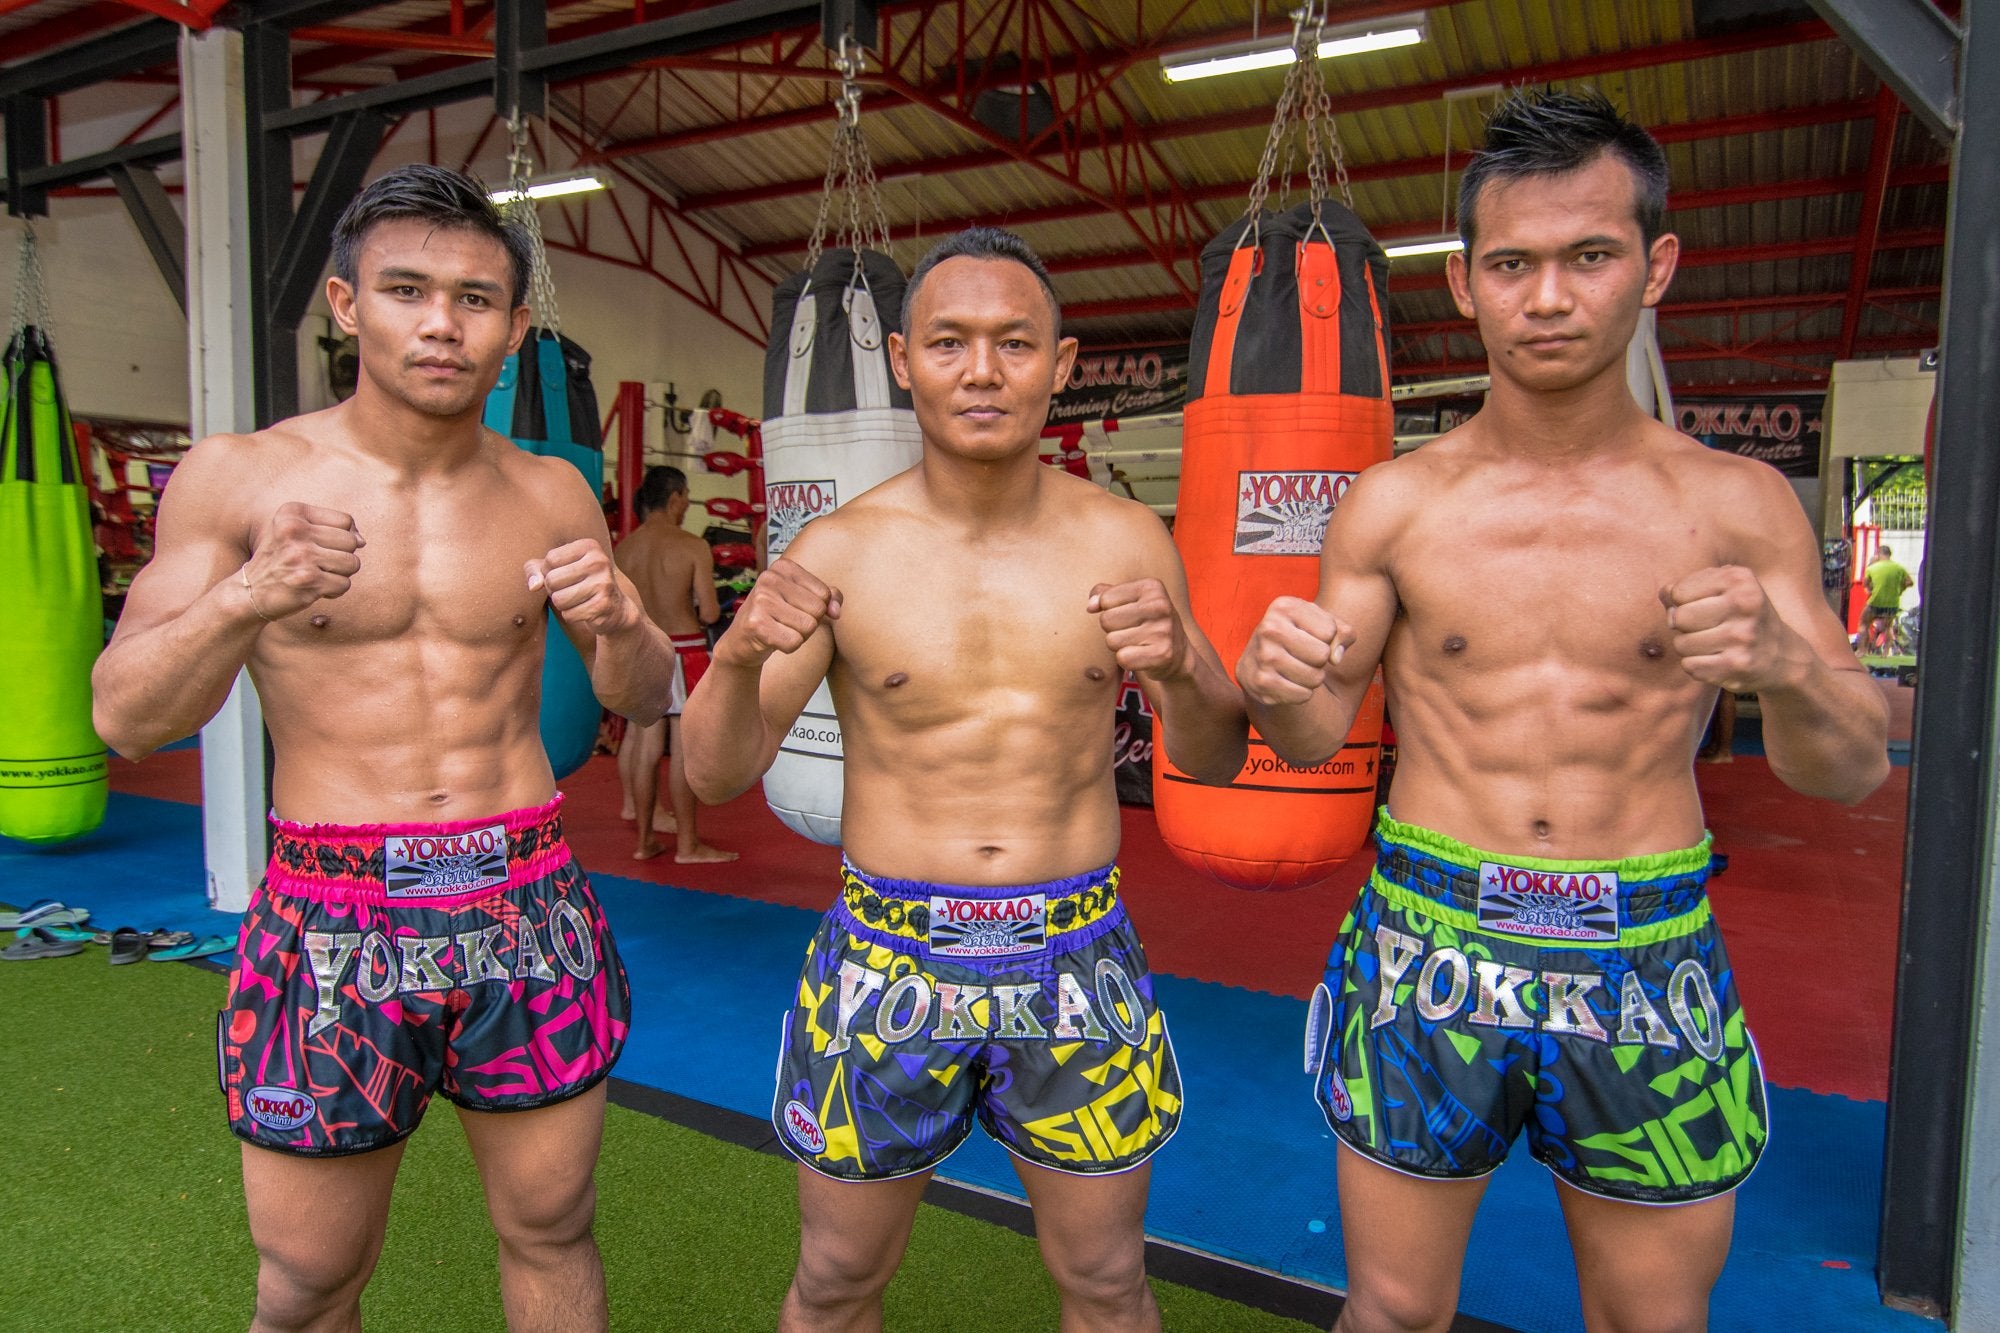 YOKKAO CarbonFit Sick Shorts - People say: "These Shorts are SICK"